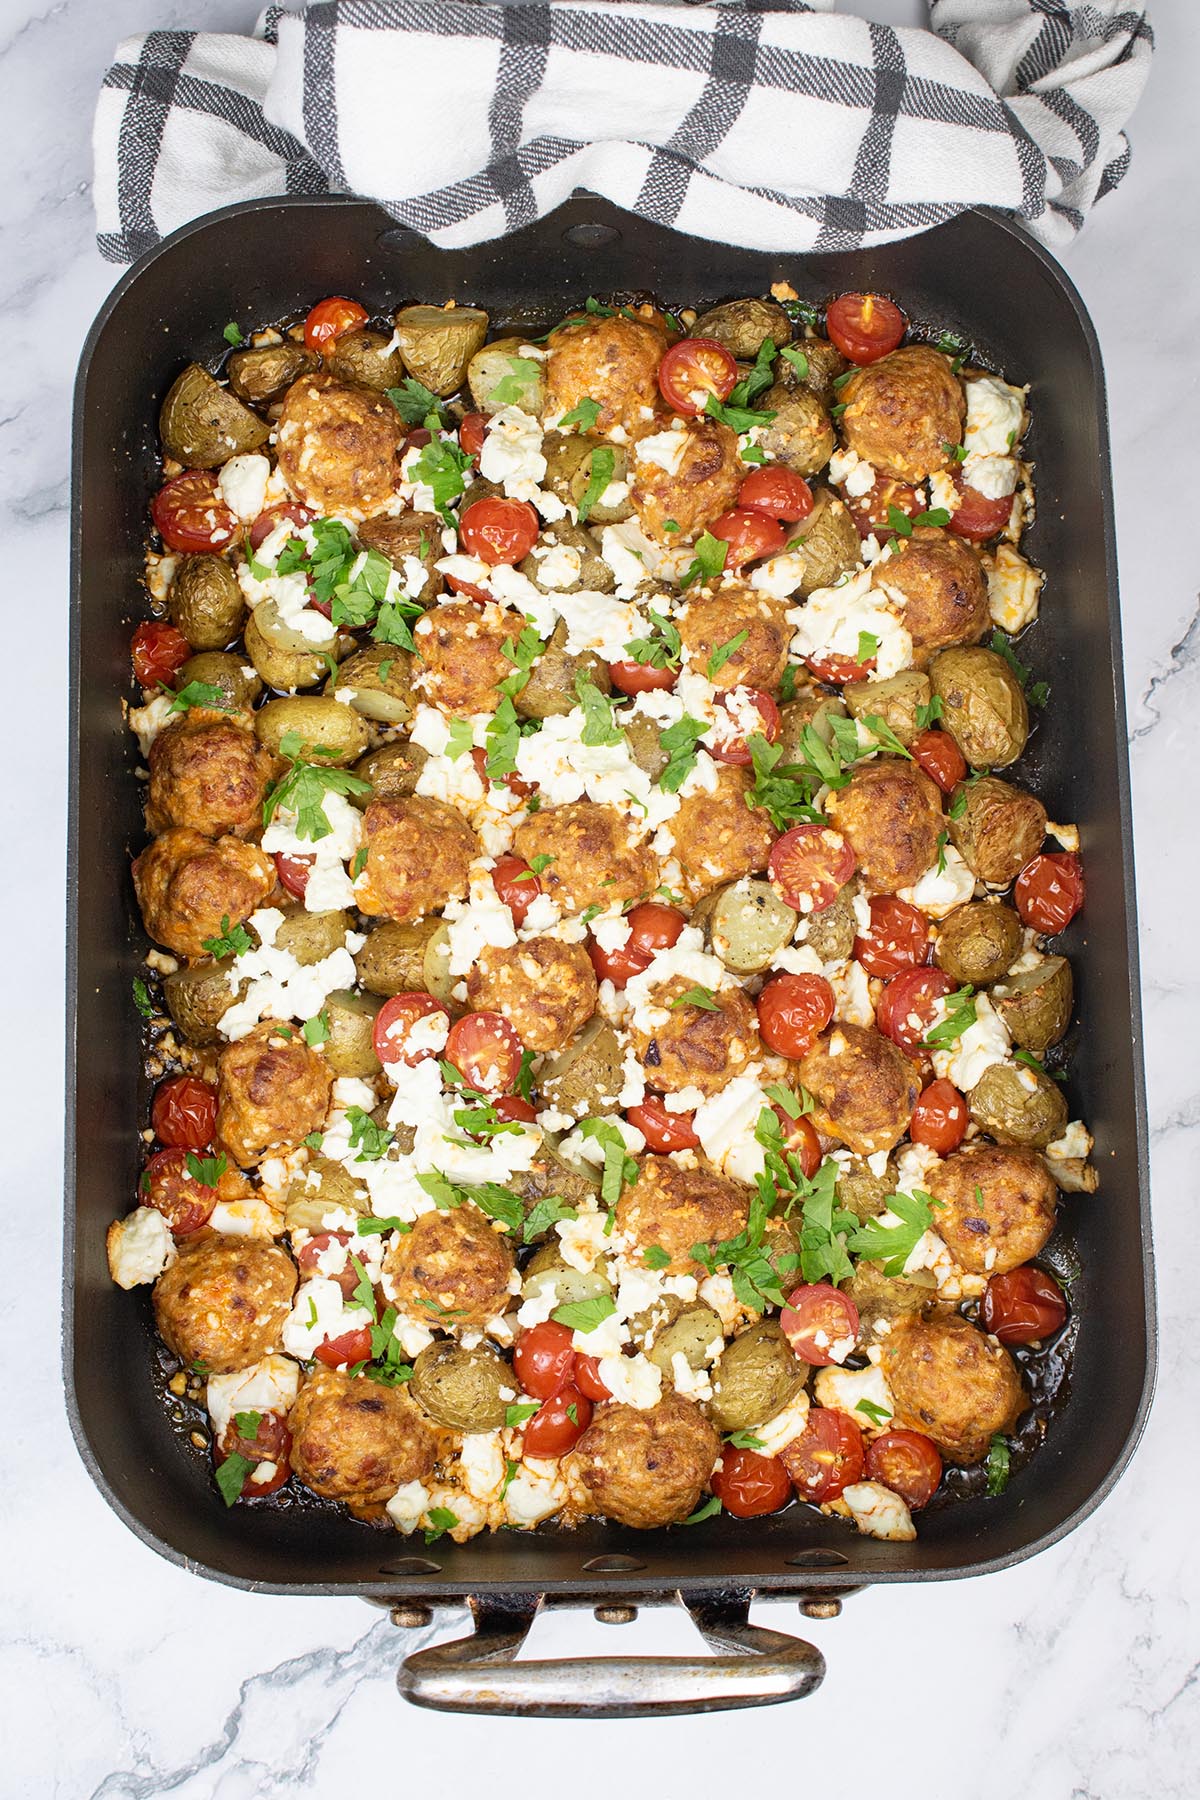 Chorizo meatball and feta traybake in large roasting tin with black and white towel on one end